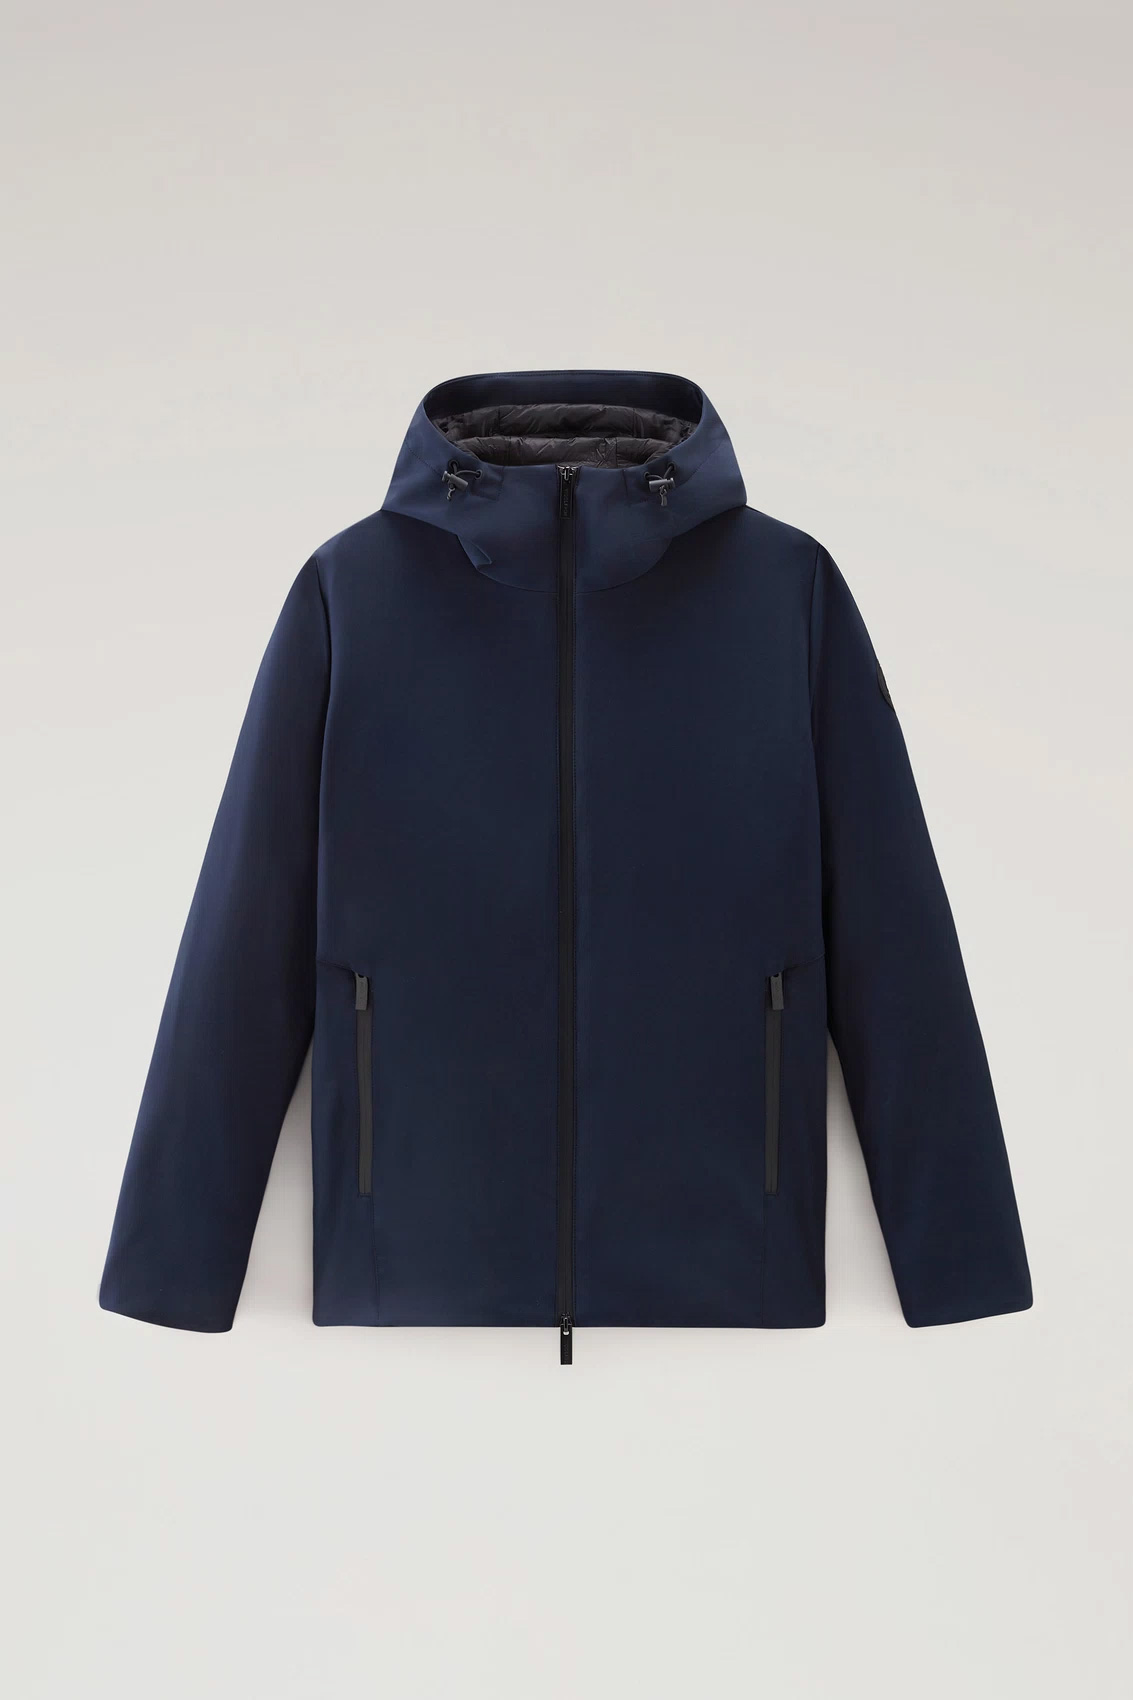 Giaccone Woolrich Pacific in tech SoftShell Blu